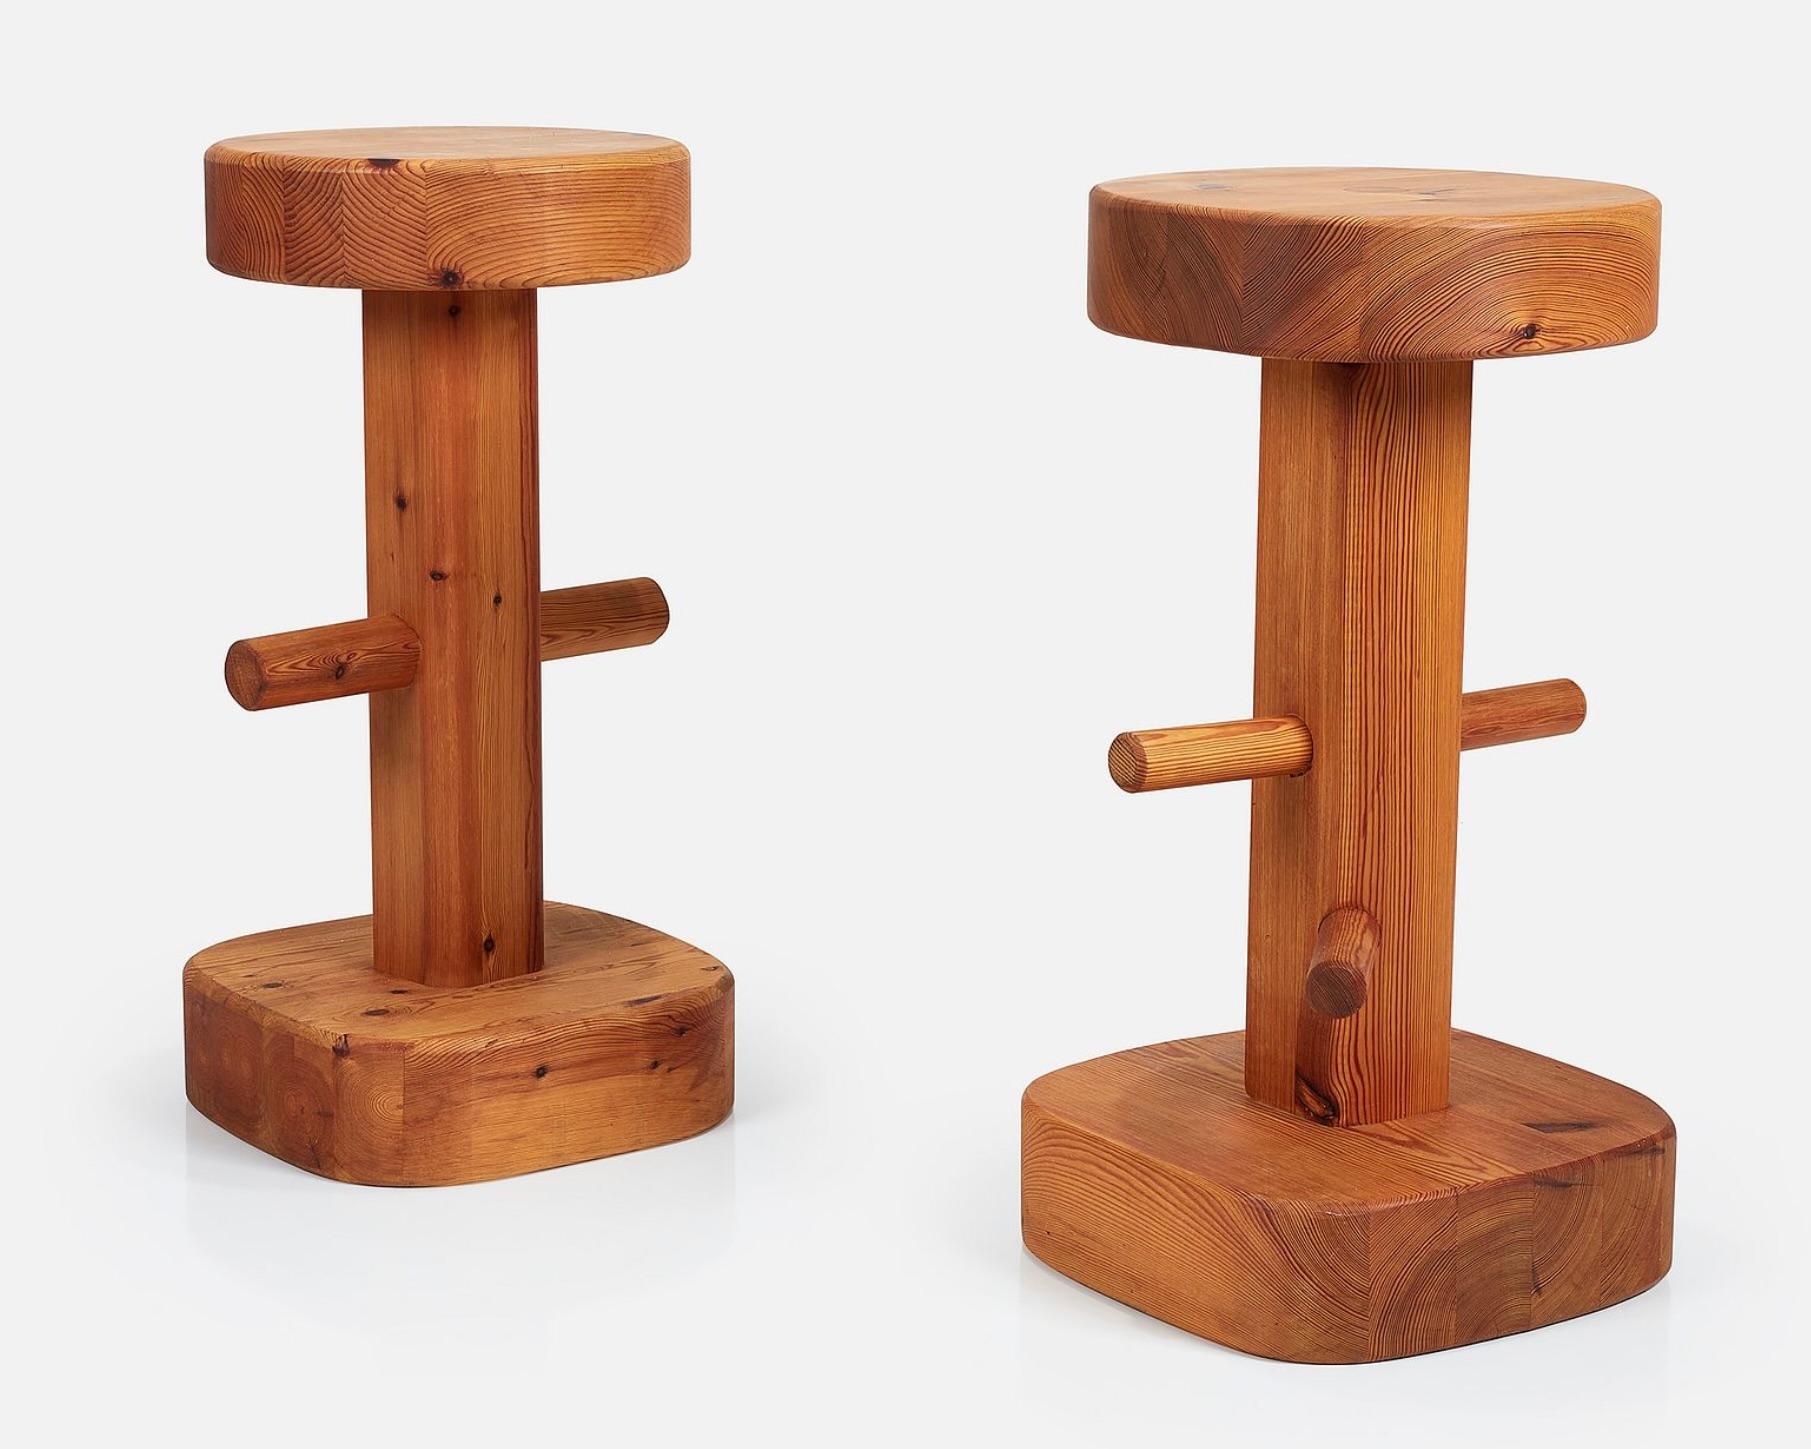 Scandinavian modern stools crafted from select yellow pine in Sweden c1970. These feature excellent craftsmanship and the minimalist style characteristic of Scandinavian furniture. The lacquered patterned pine adds a touch of charm and warmth. On